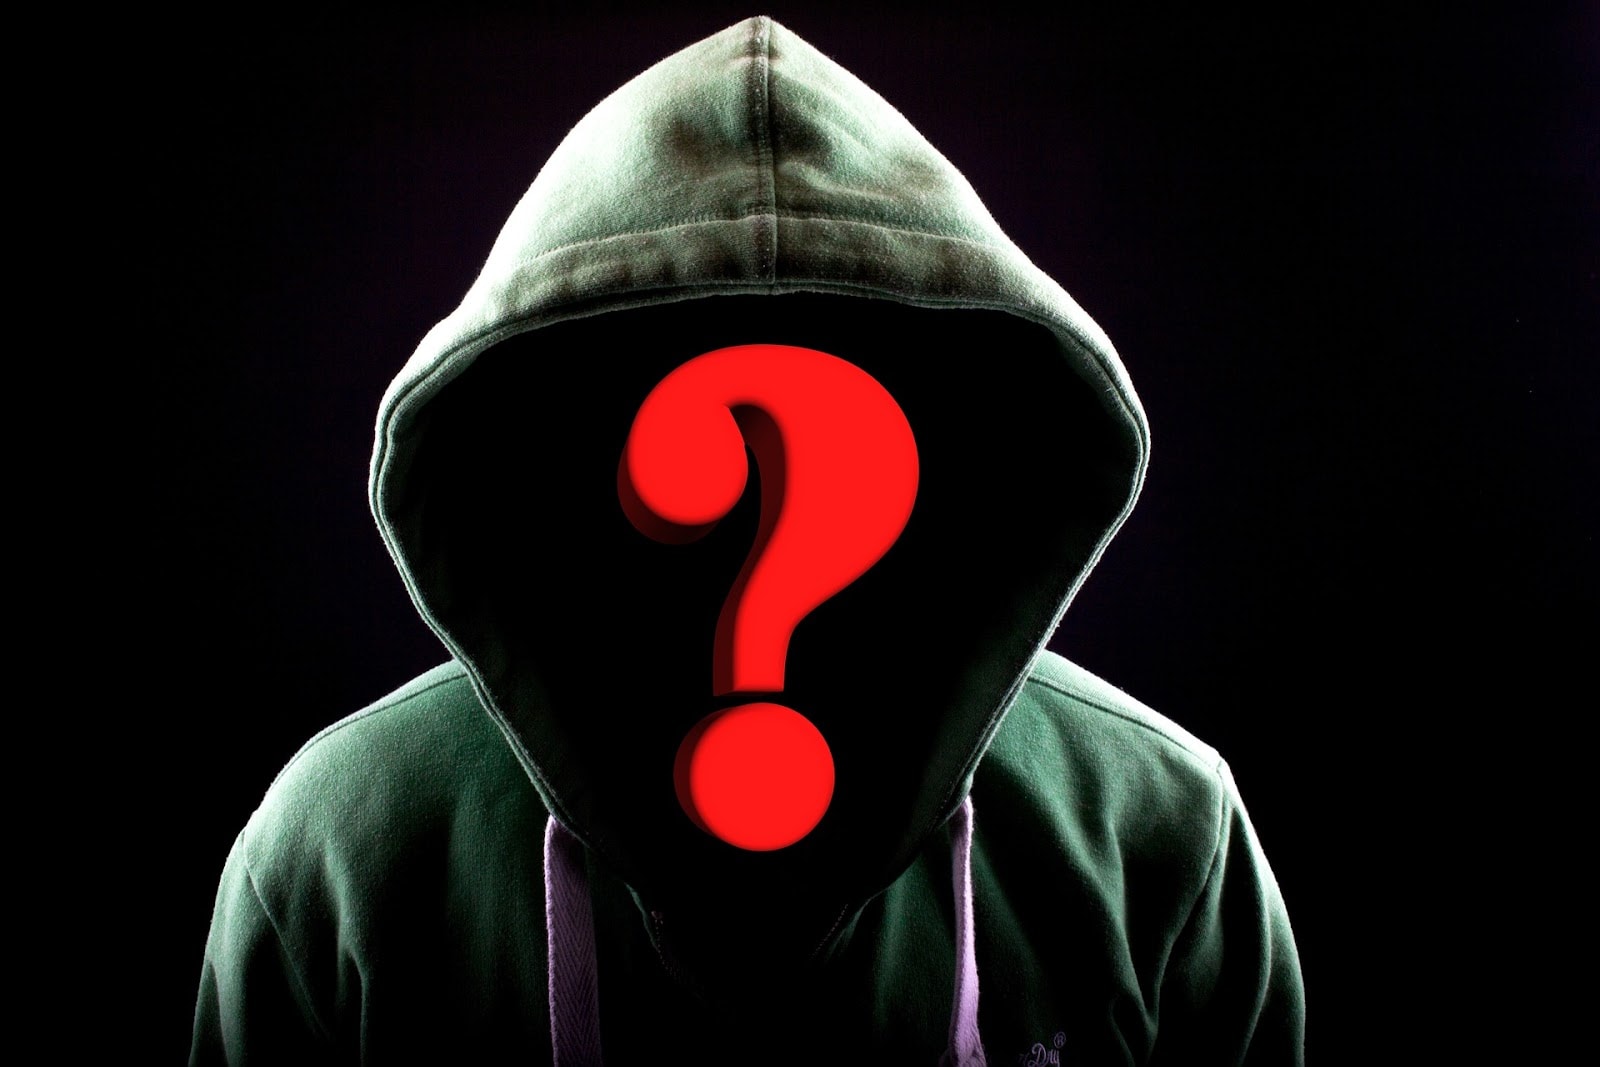 image of a hooded sweatshirt with question mark